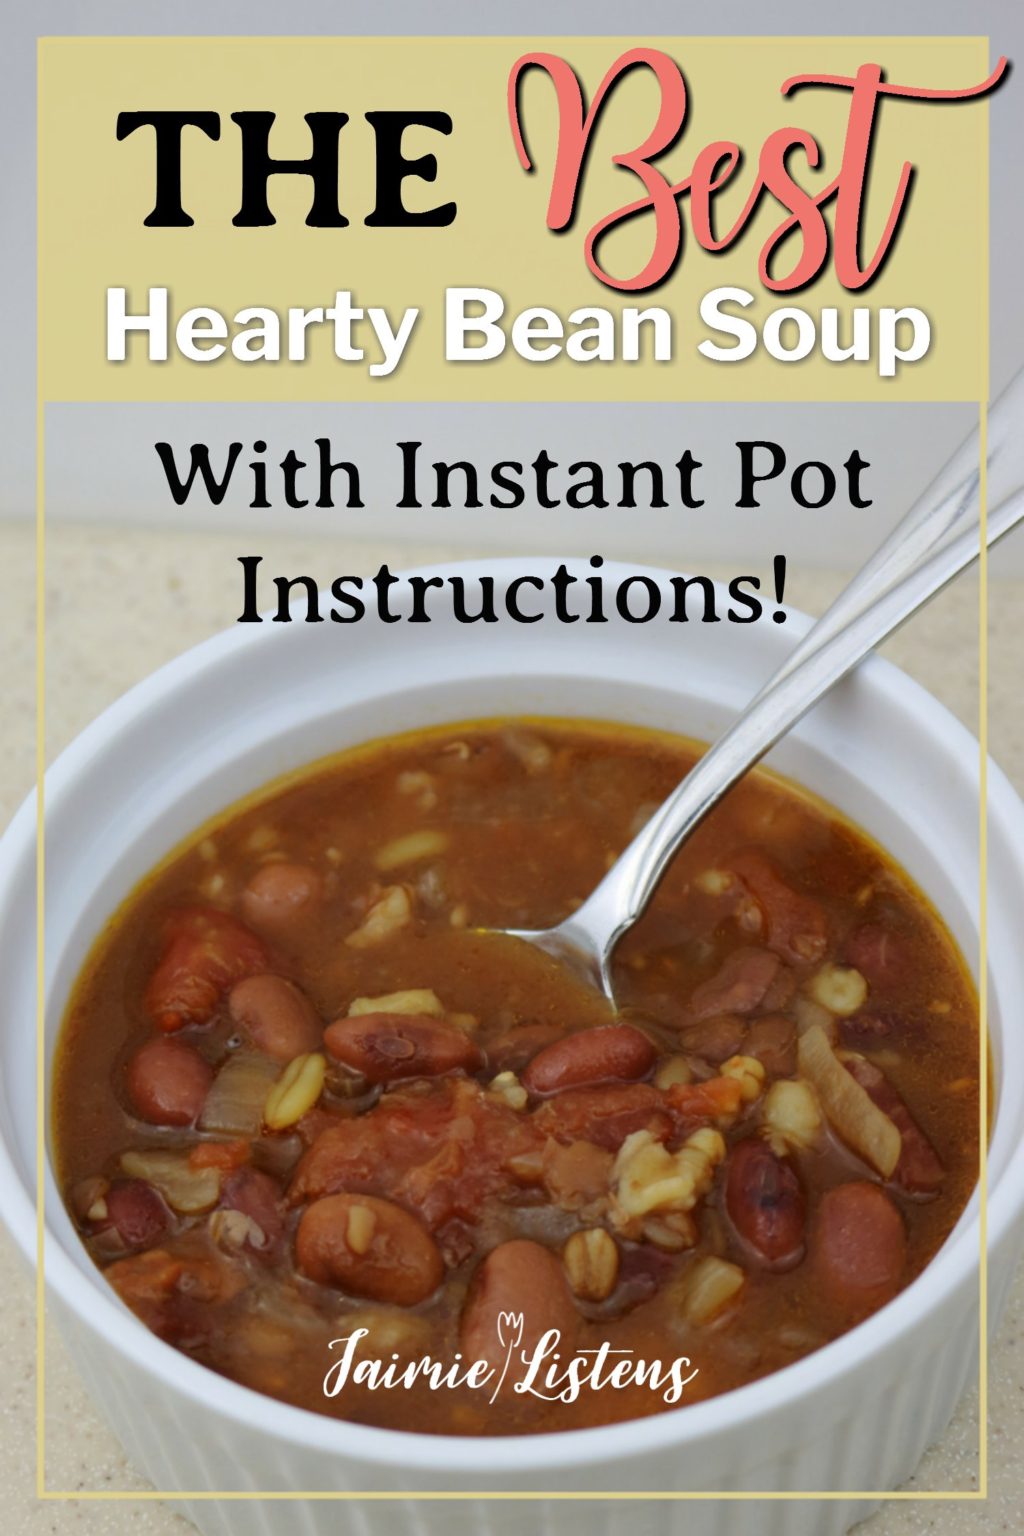 Best Hearty Bean Soup Mix - Jaimie Listens: This hearty soup uses Bob's Red Mill Whole Grains and Beans soup mix to create a simple and healthy meal for 6 for under $10!